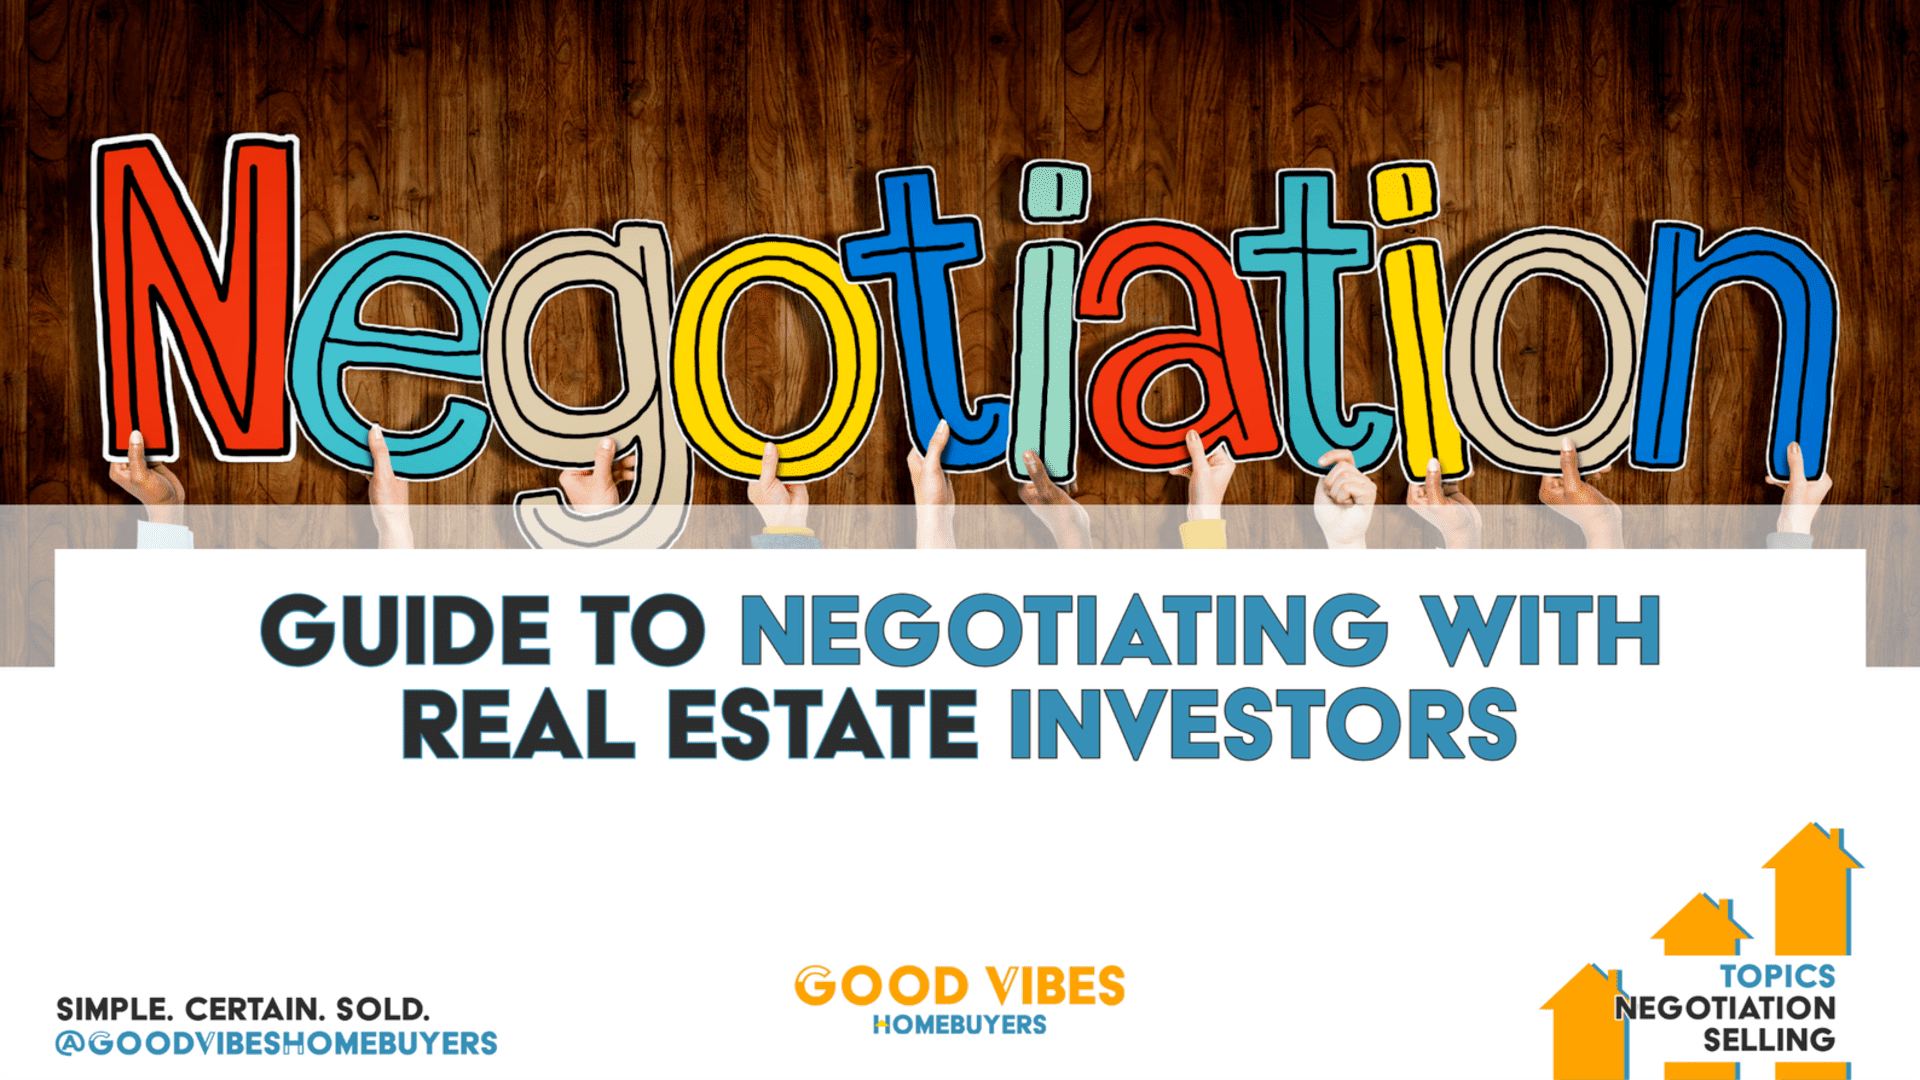 Guide to Negotiating with Real Estate Investors